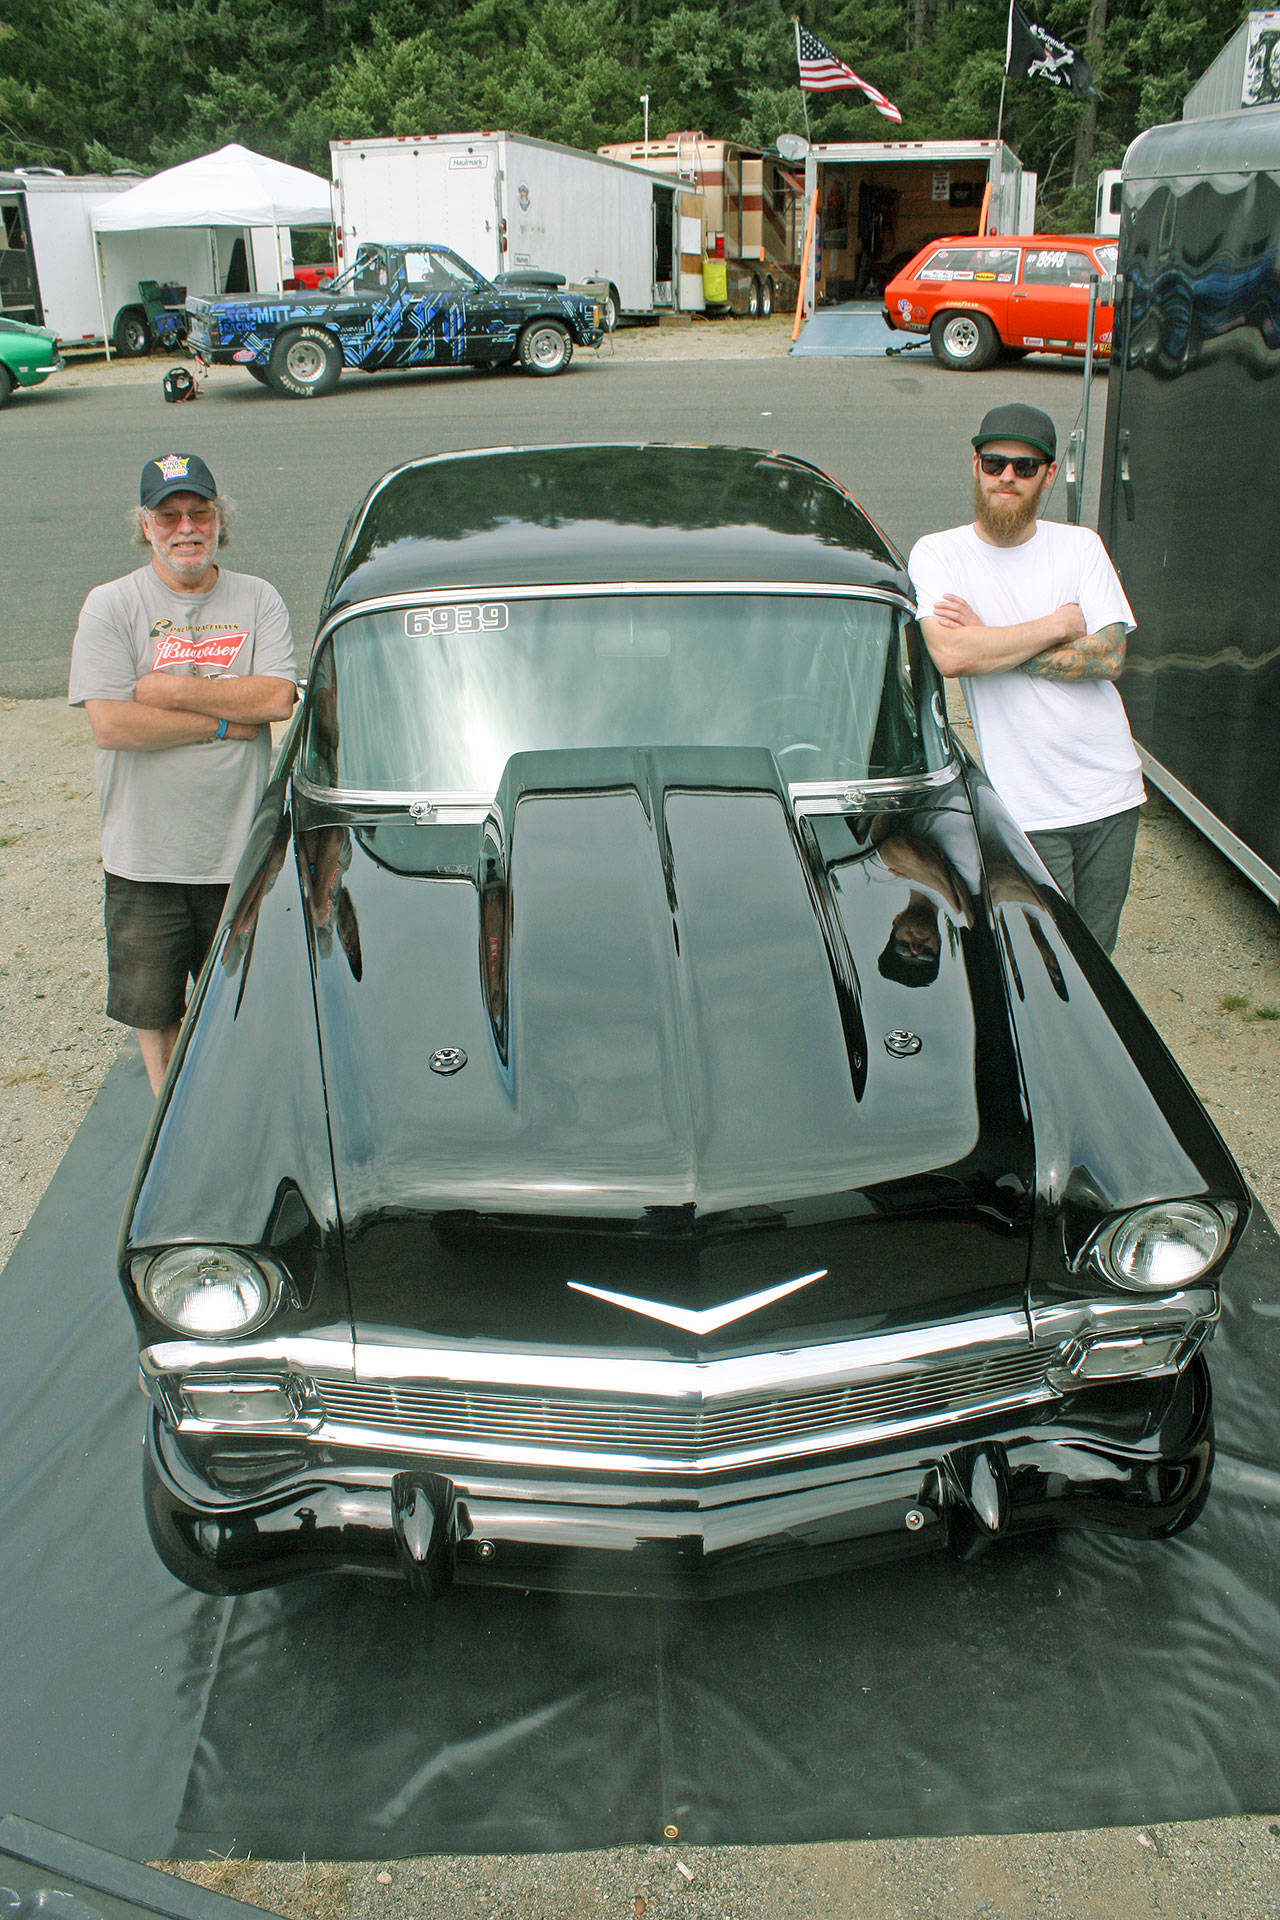 With the help of his father, Stan, left, Brian McGinnis, right, has emerged as a champion driver on the local drag strip. MARK KLAAS, Kent Reporter